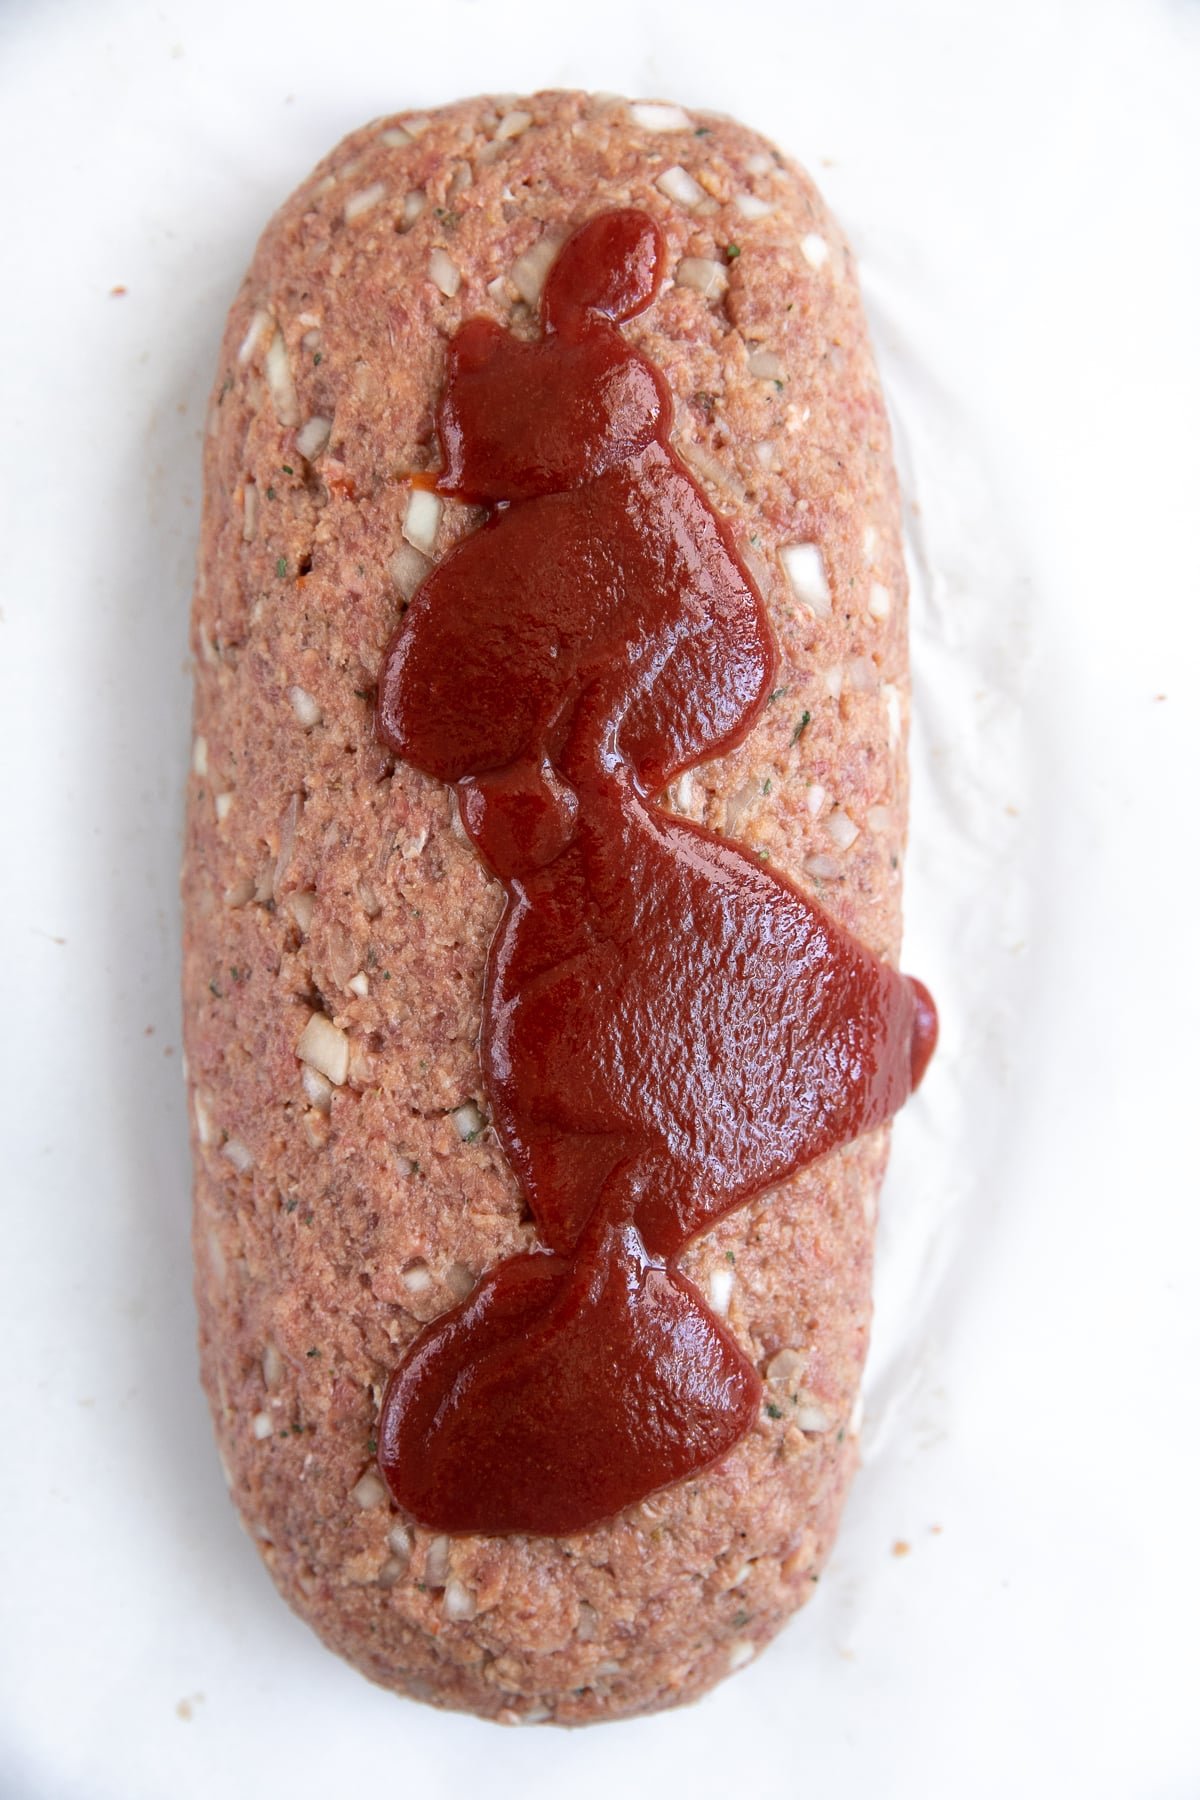 Unbaked beef meatloaf on a large parchment paper lined baking sheet topped with homemade ketchup sauce.